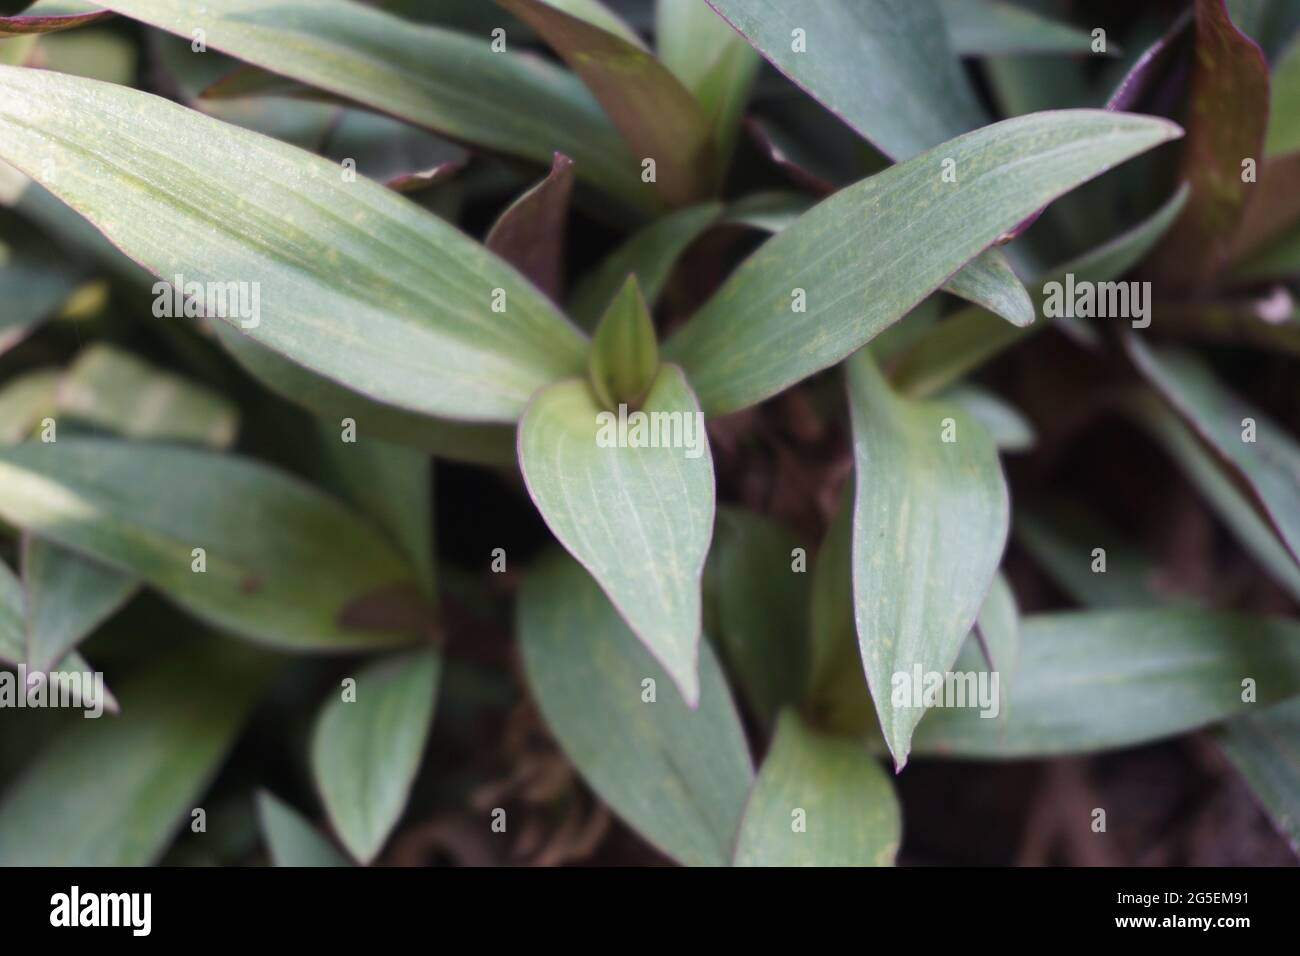 Tradescantia spathacea plant with a natural background Stock Photo